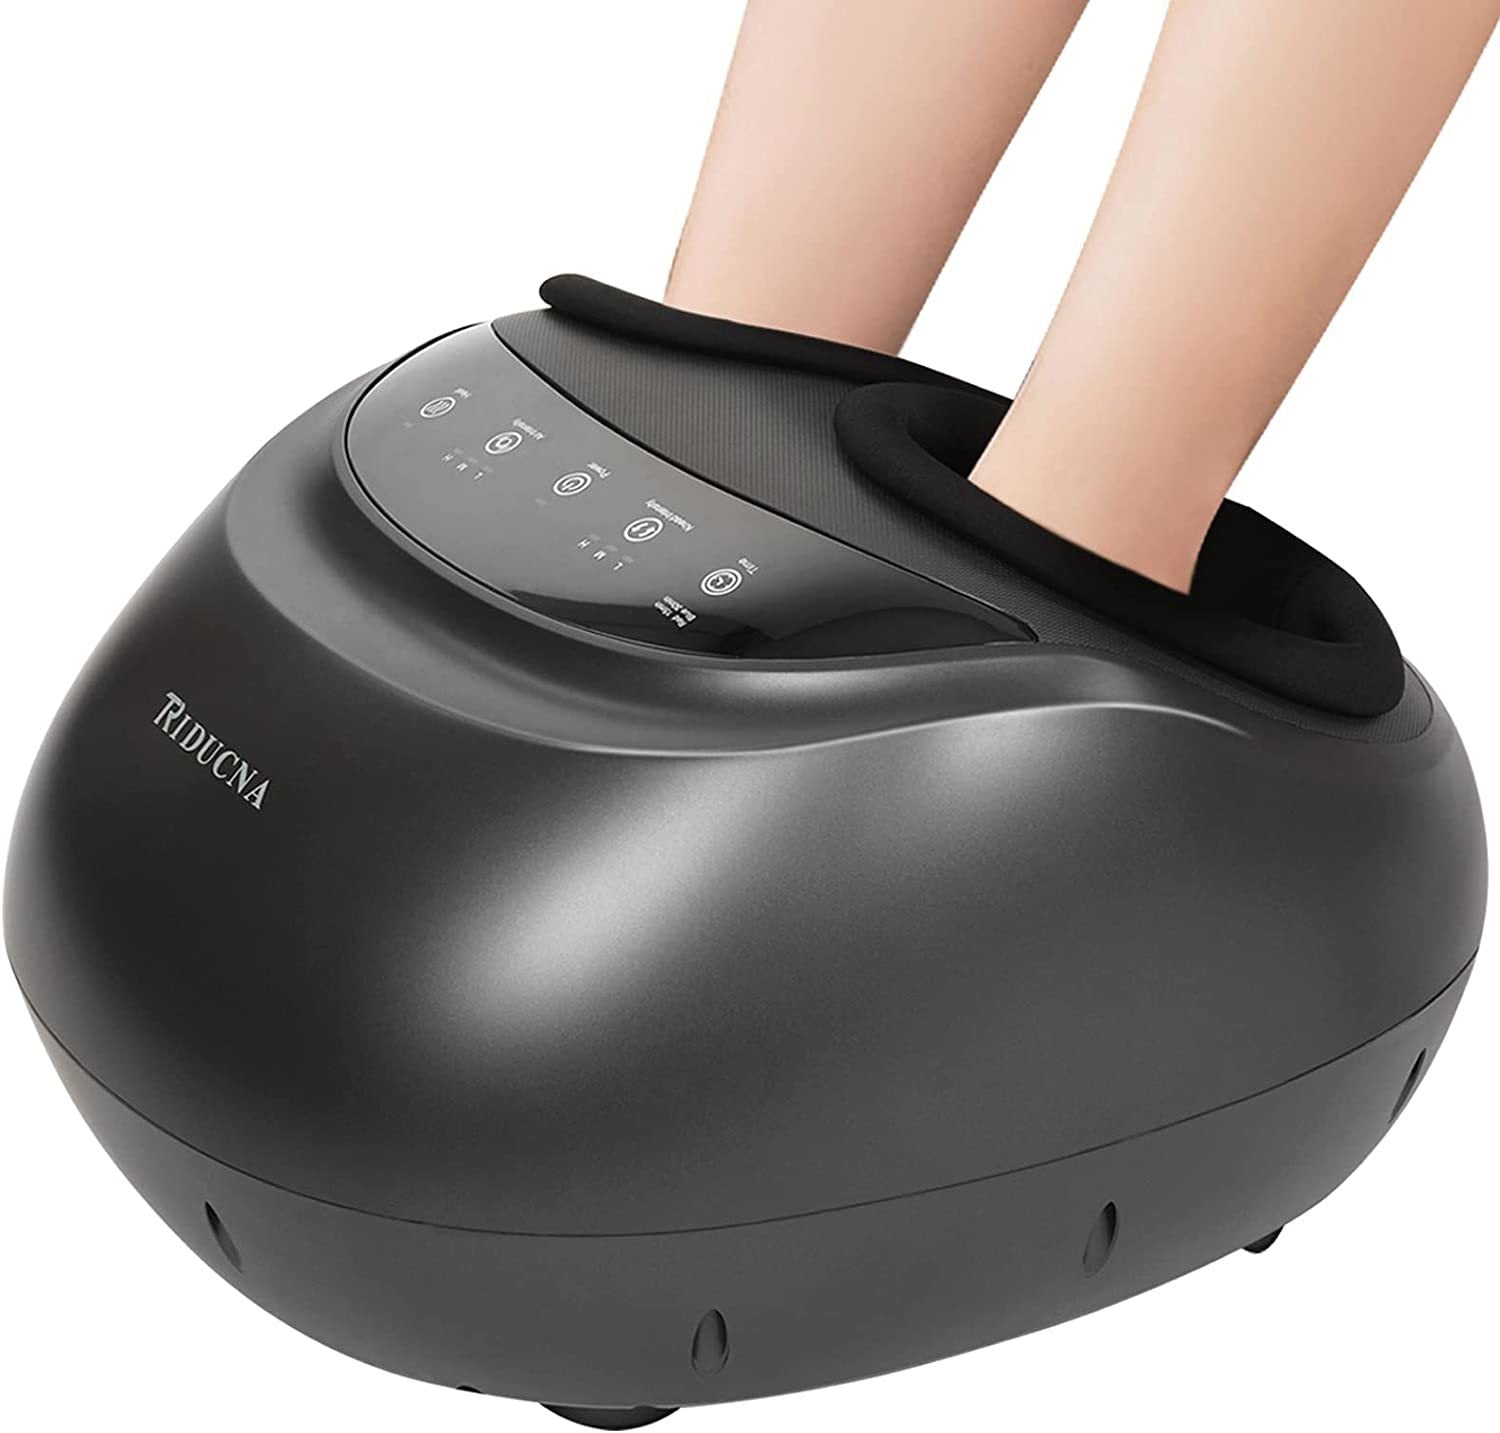 Shiatsu Foot Massager Machine, Electric Kneading Foot Massage with Remote Control for Home,Family, Plantar Fasciitis, Deep Kneading Therapy,Increases